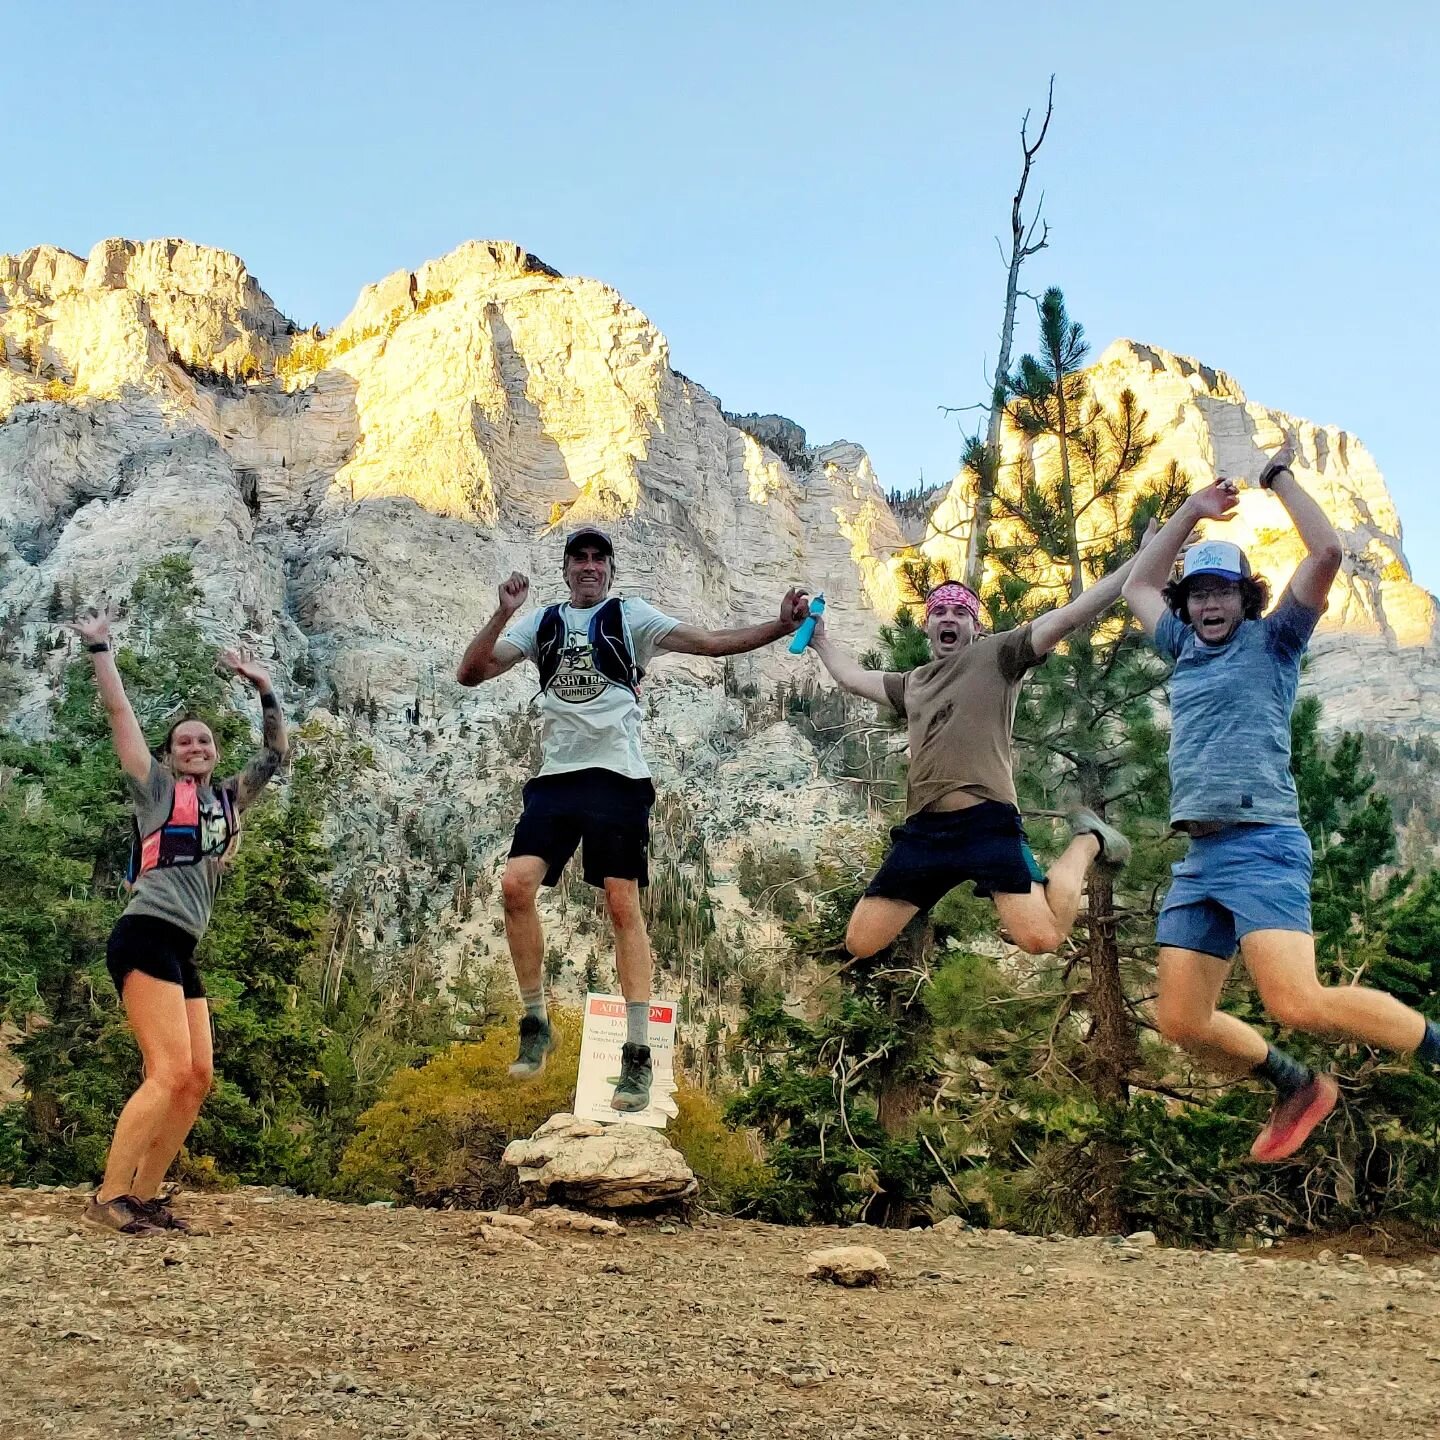 Hip hip hooray for happy trails! Support healthy trails by joining us and @aravaipacolorado for our first Colorado event on Sunday, July 24th, in Colorado Springs. 

Location: Yucca Flats Trailhead, Palmer Park
Time: 7:45AM

We'll start with a 4-mile